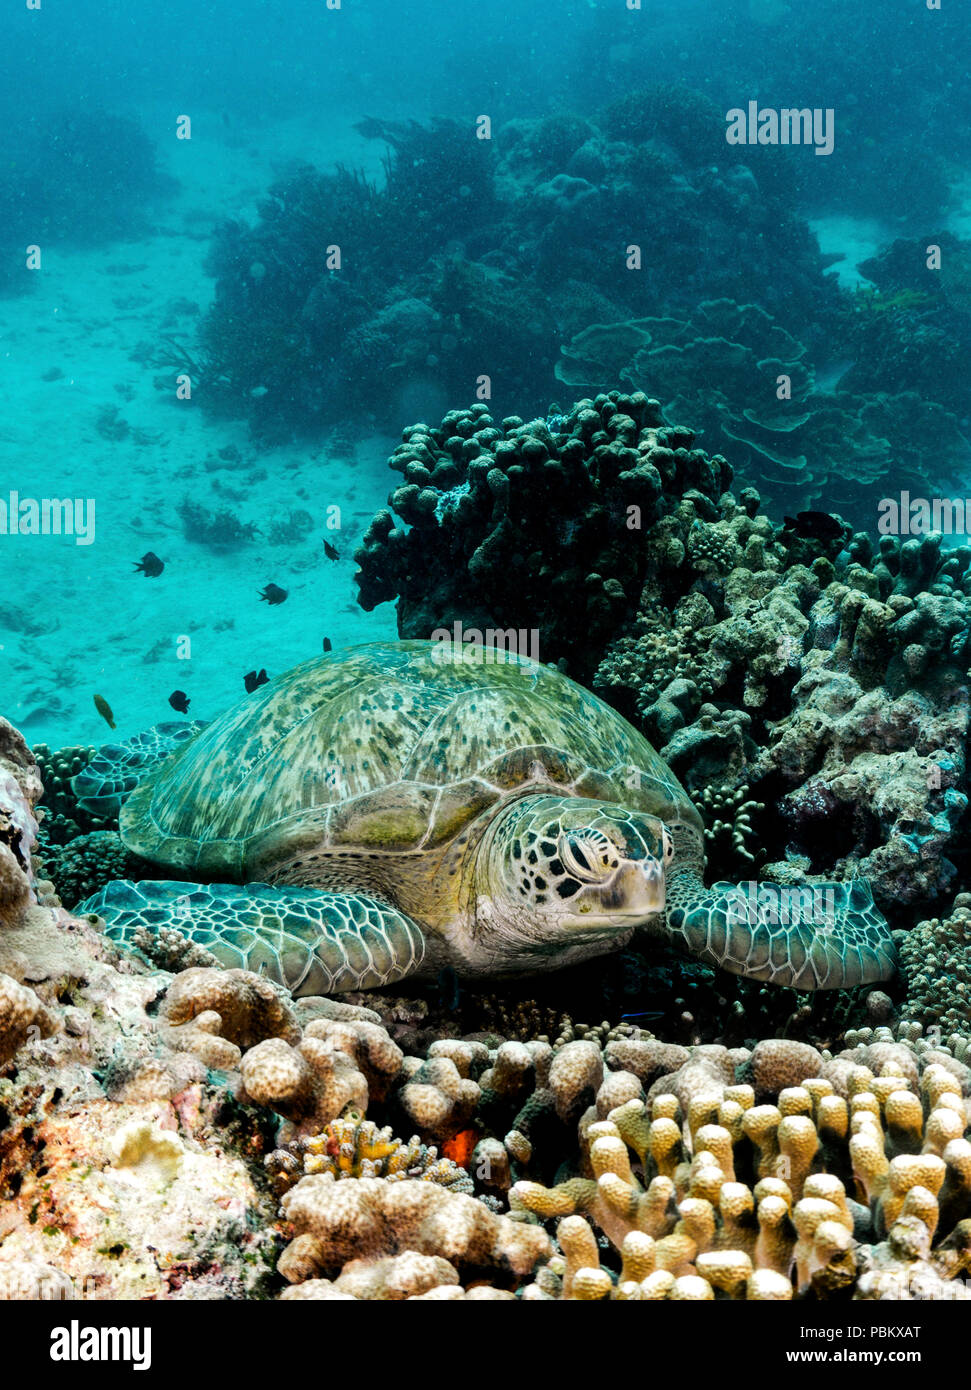 A sea turtle resting on a bed of coral in Komodo national park, Indonesia Stock Photo